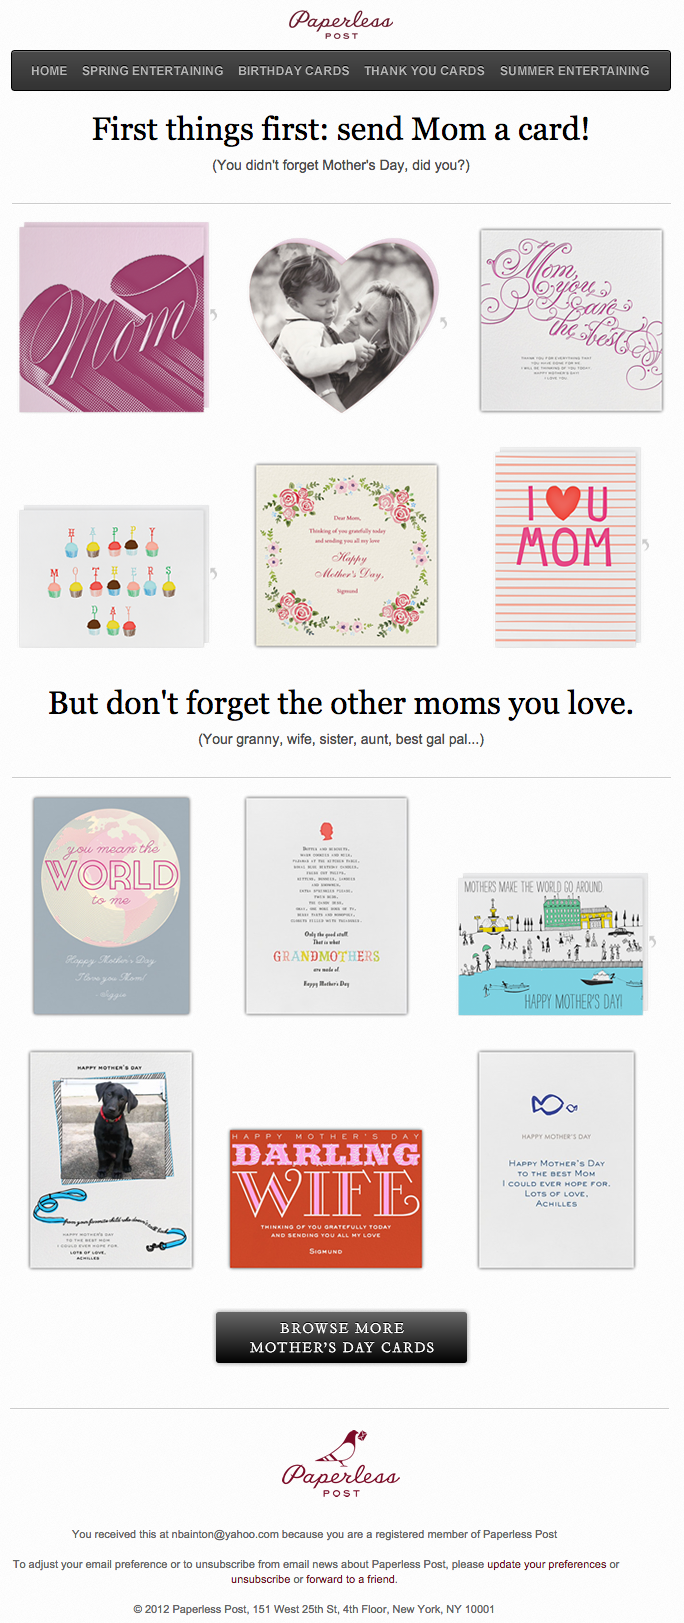 Email marketing campaign example by Paperless Post on Mother's Day